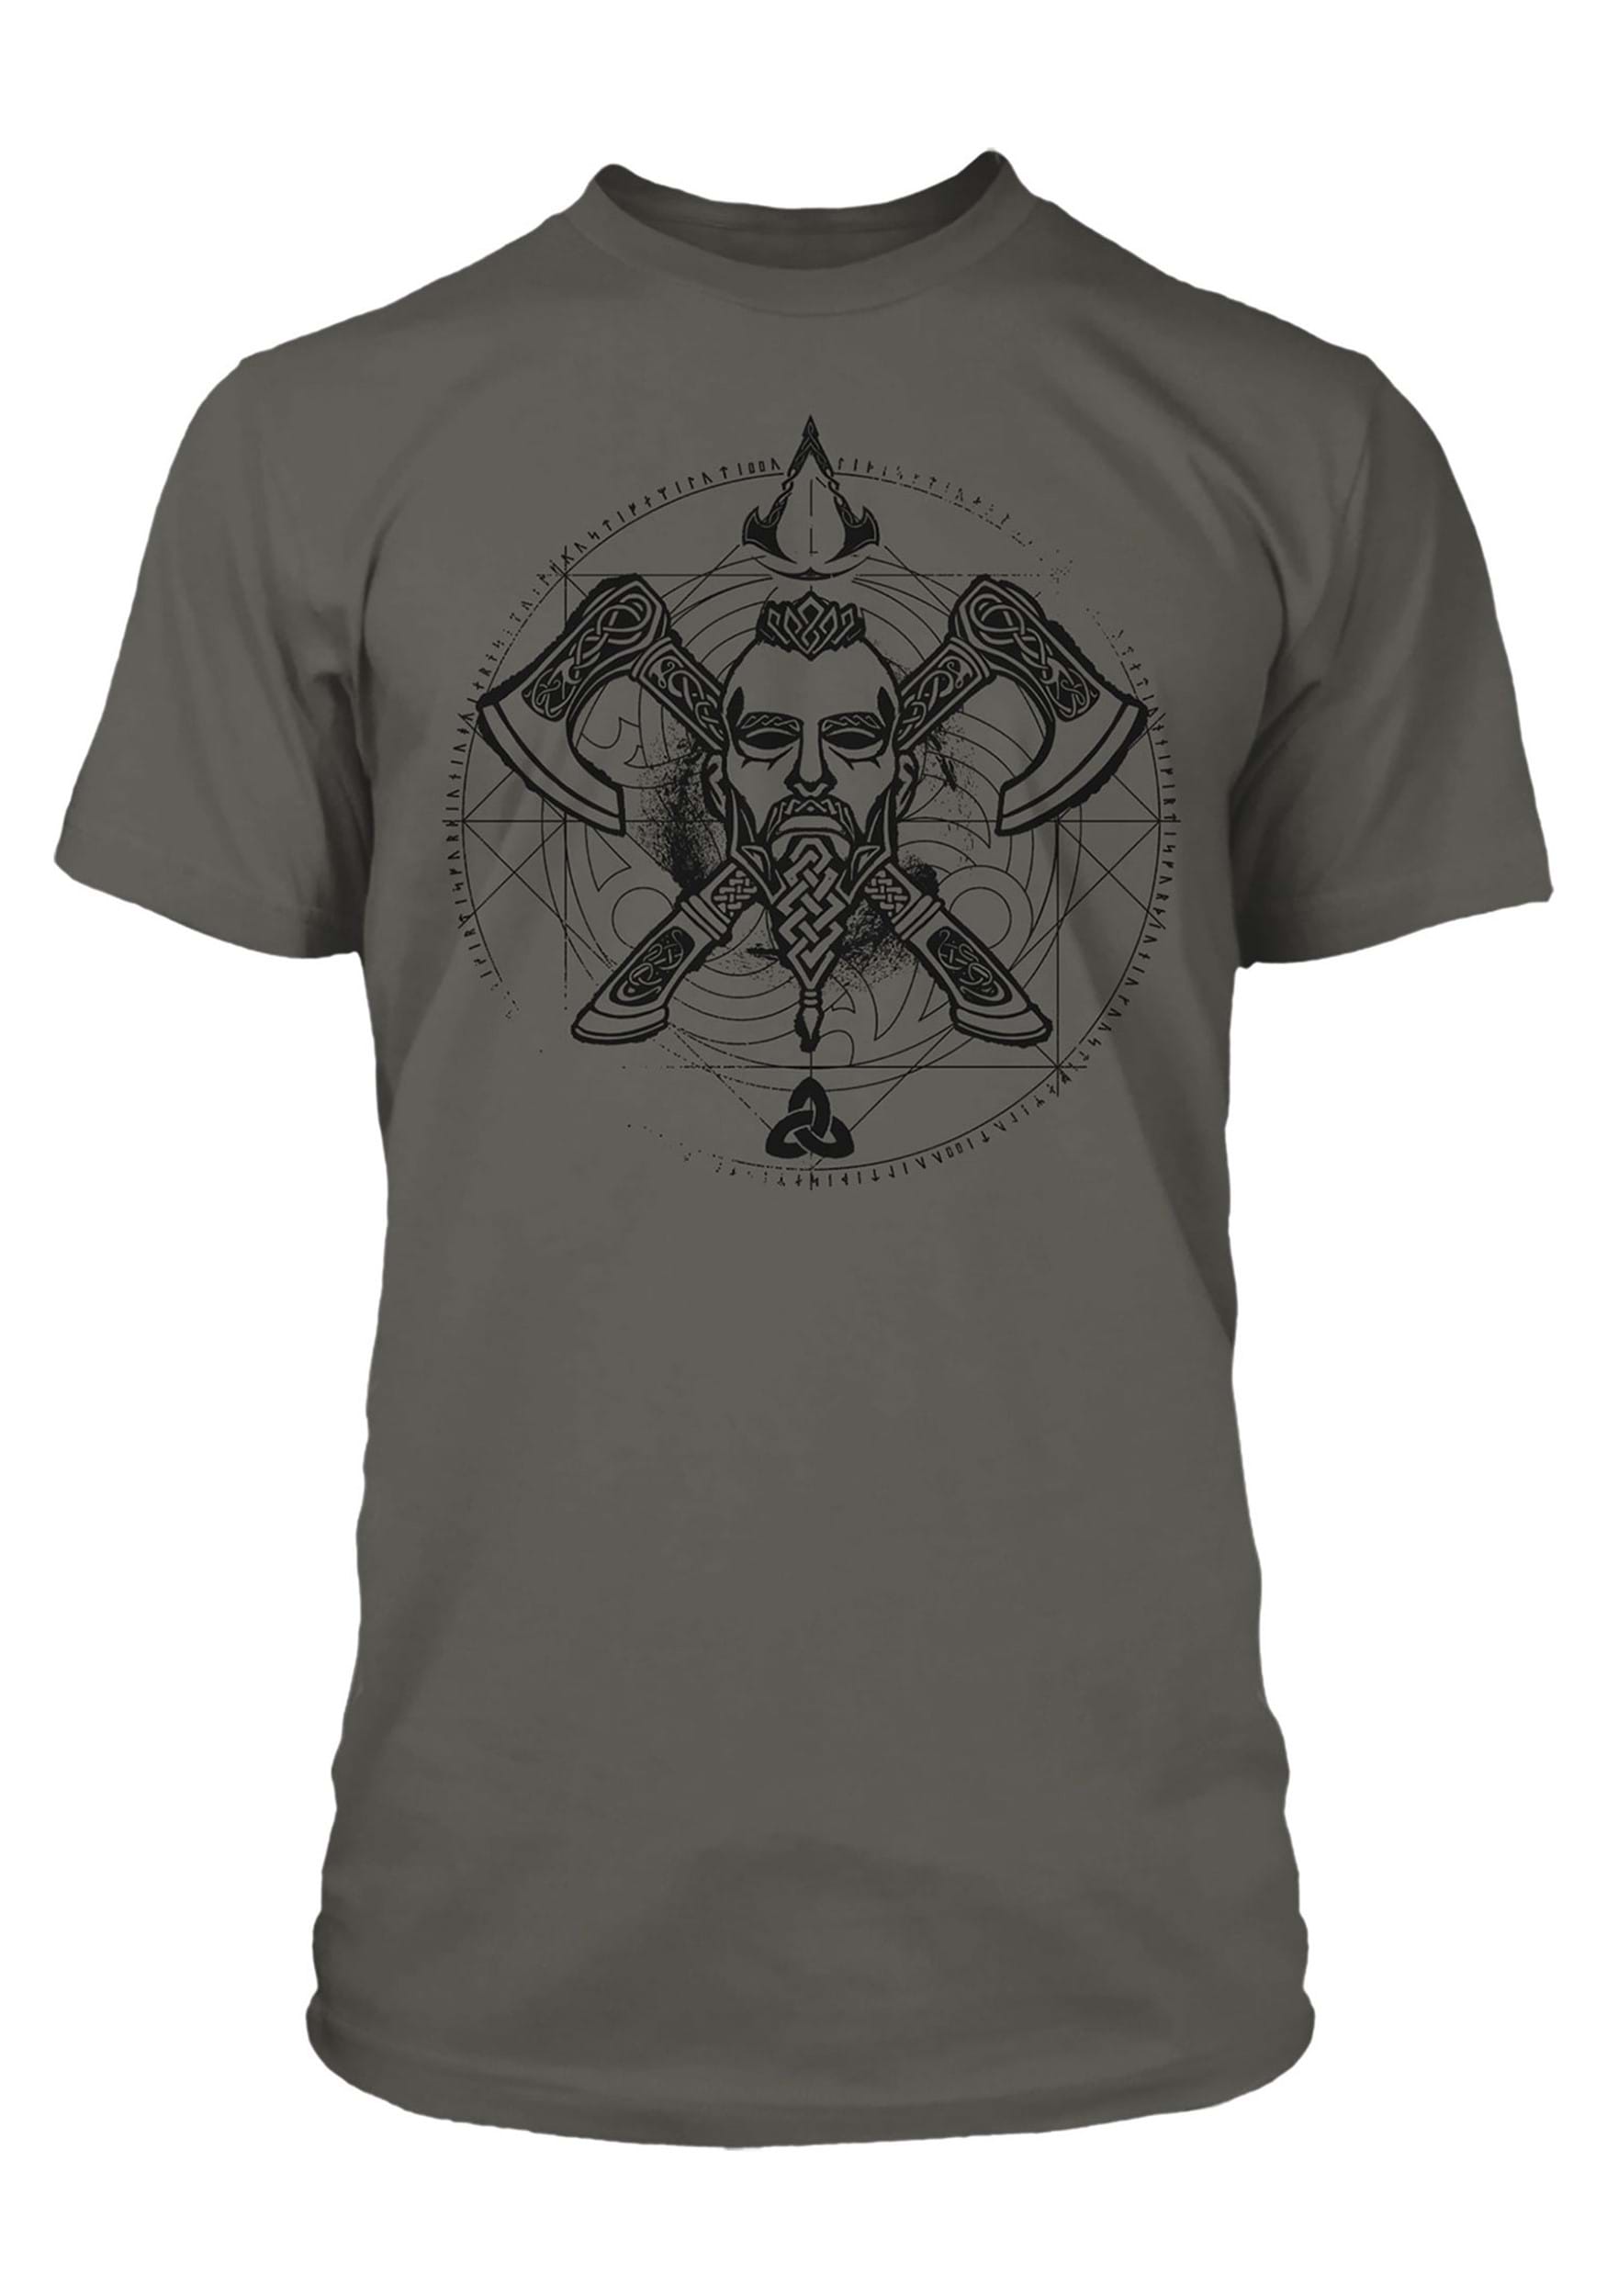 Valhalla Leader Of The Pack Assassins Creed Premium T-Shirt